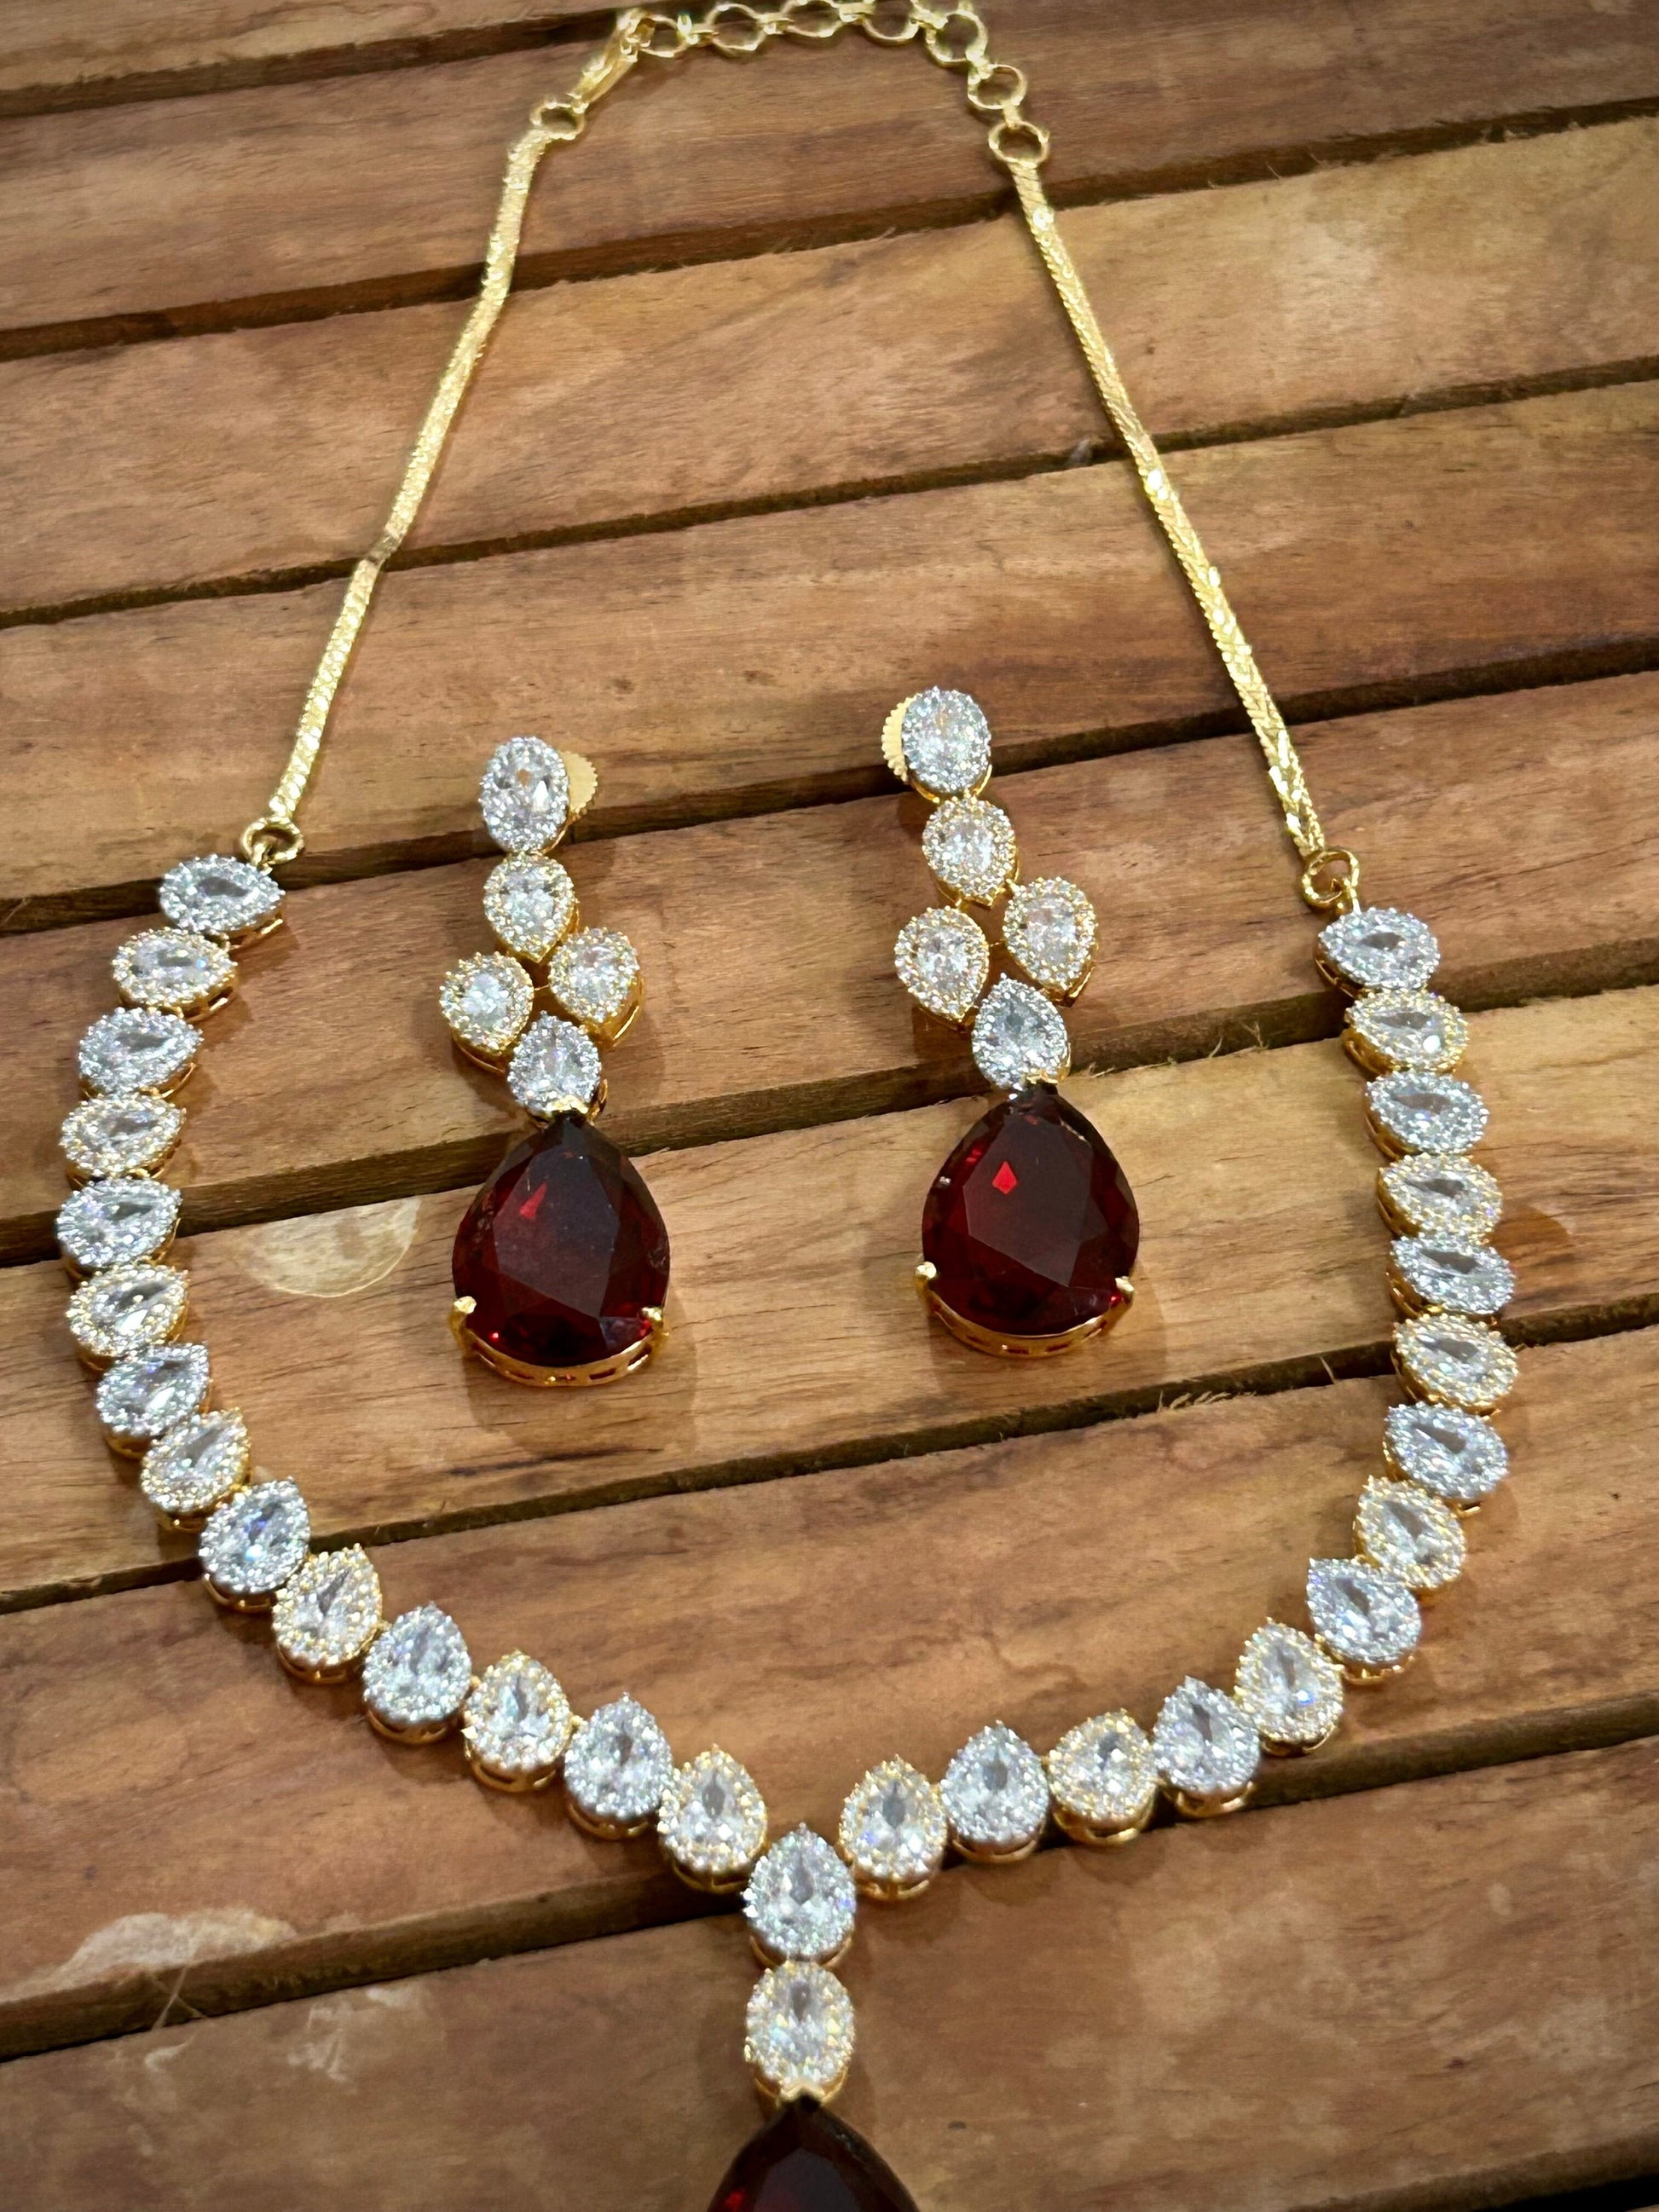 American Diamond necklace with pink stones and rose gold polish